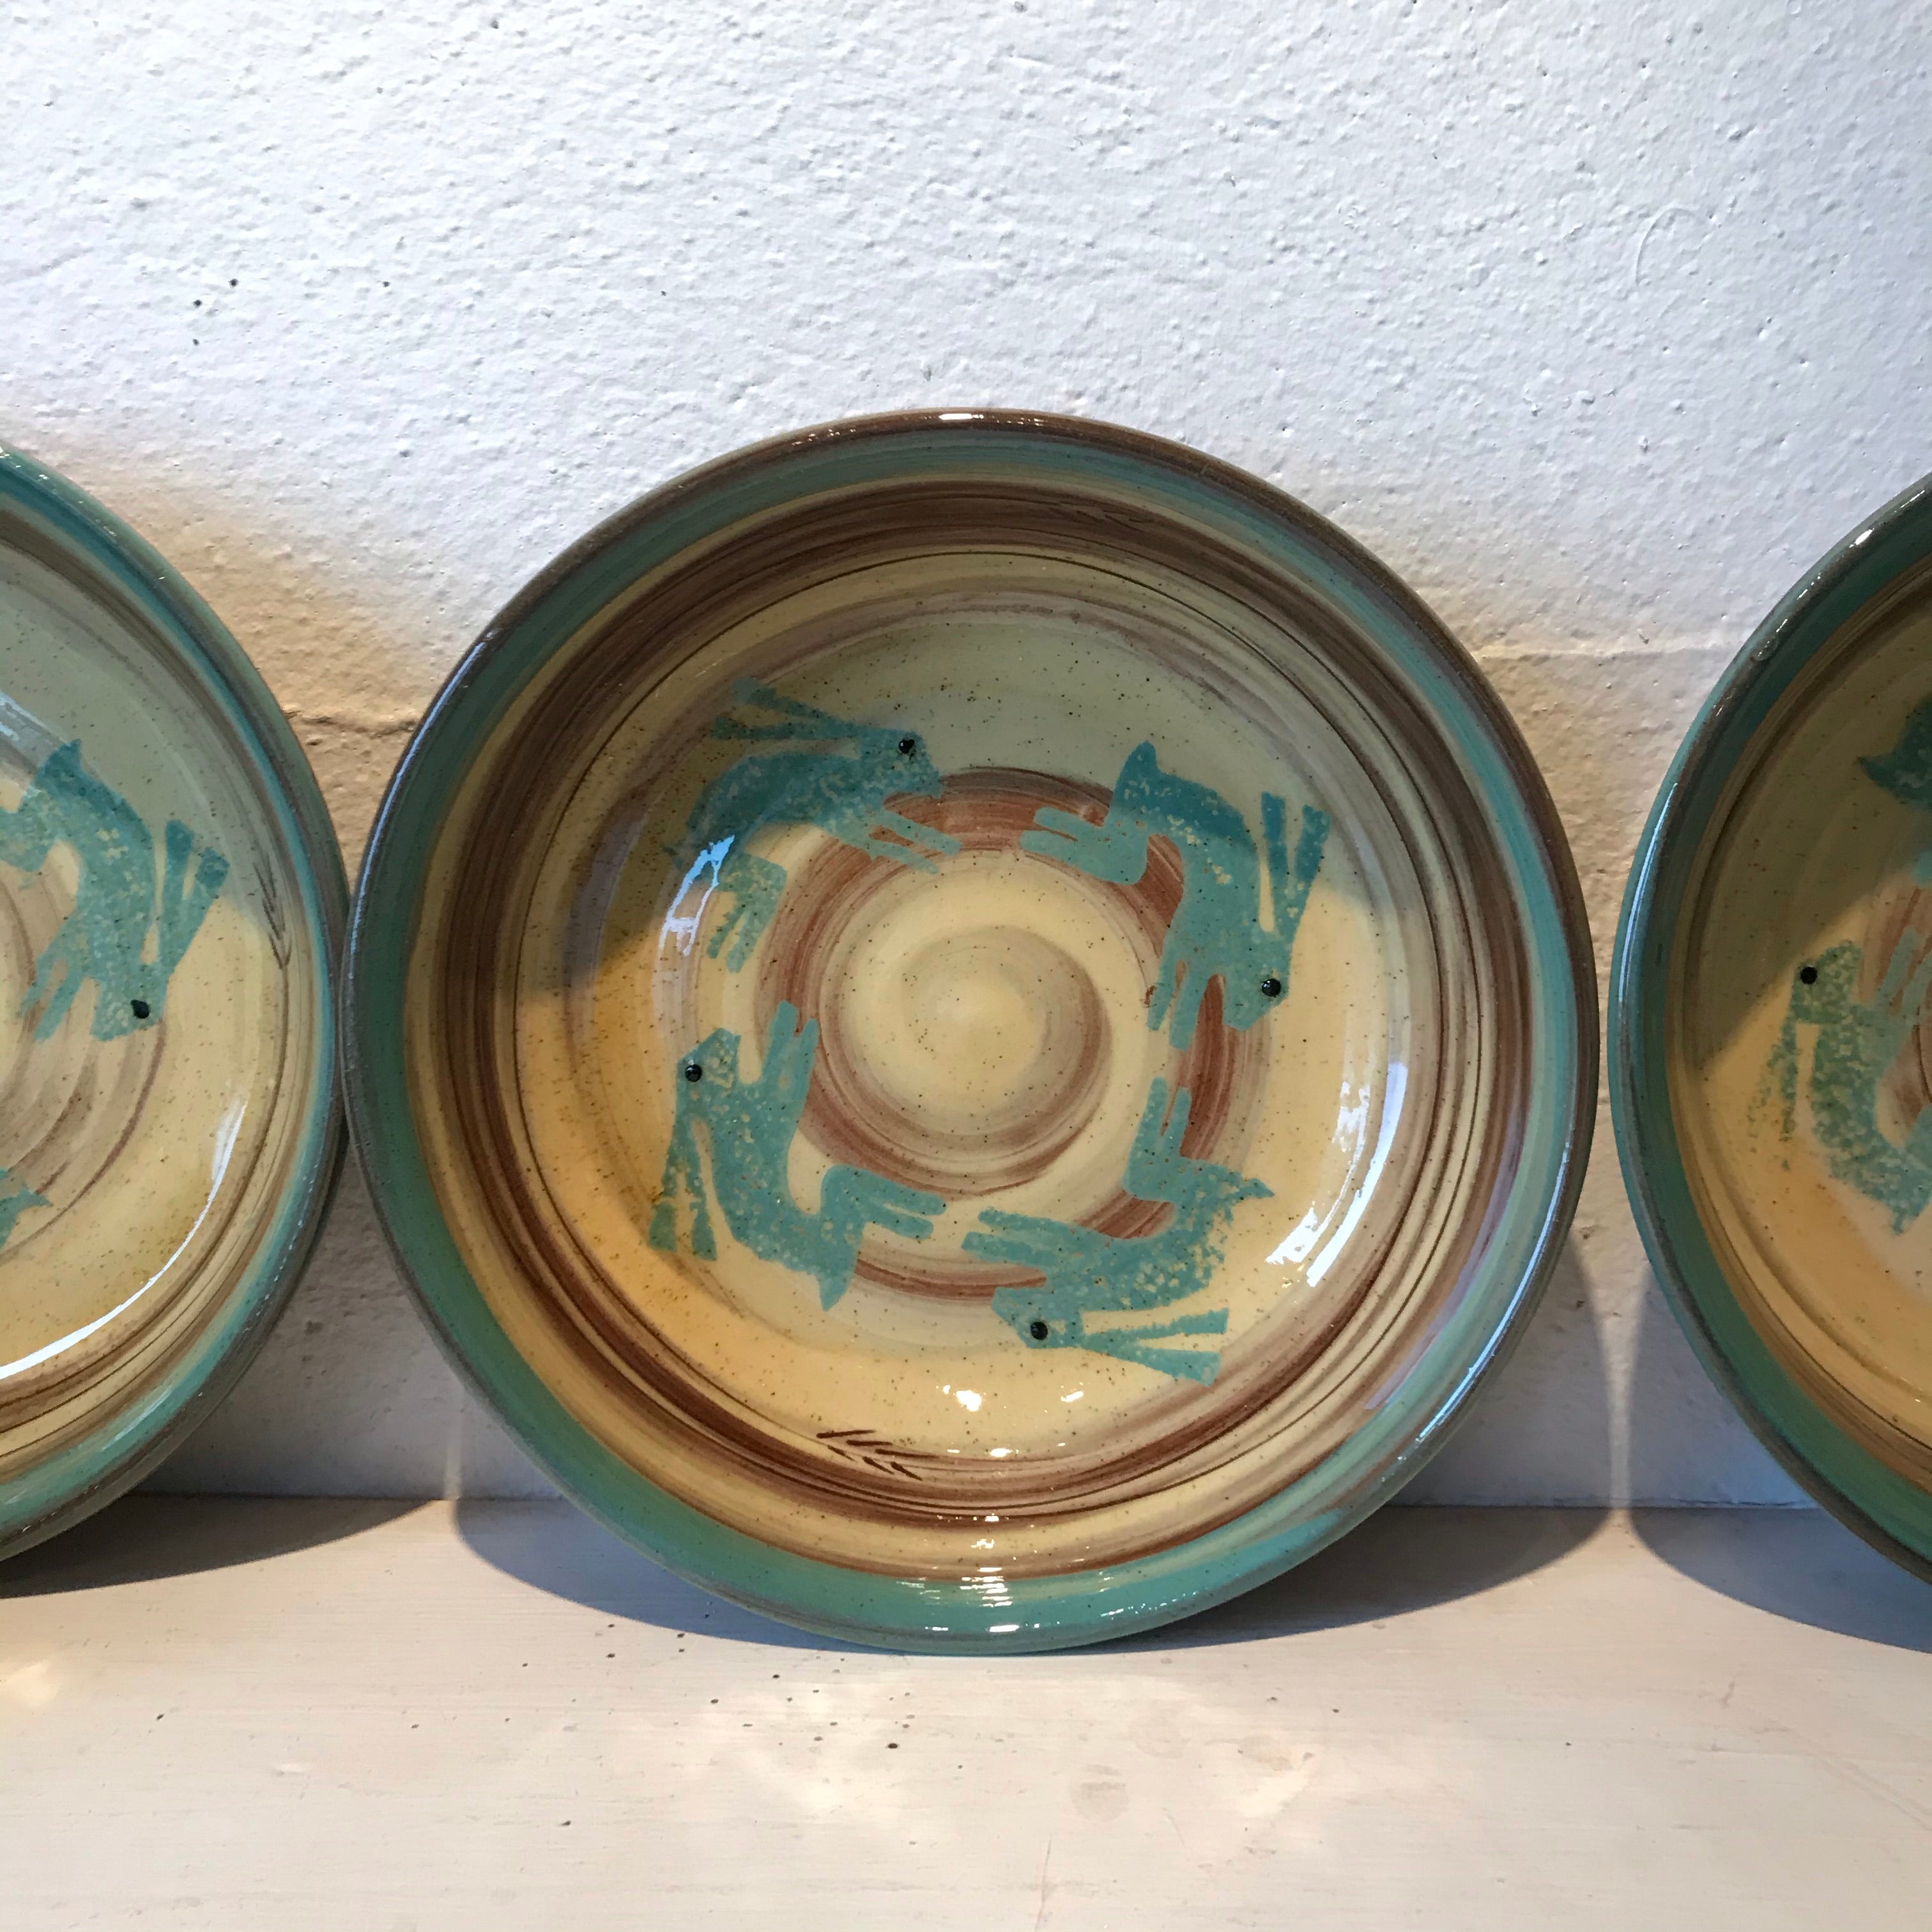 Cream and Turquoise Bowl with Hares